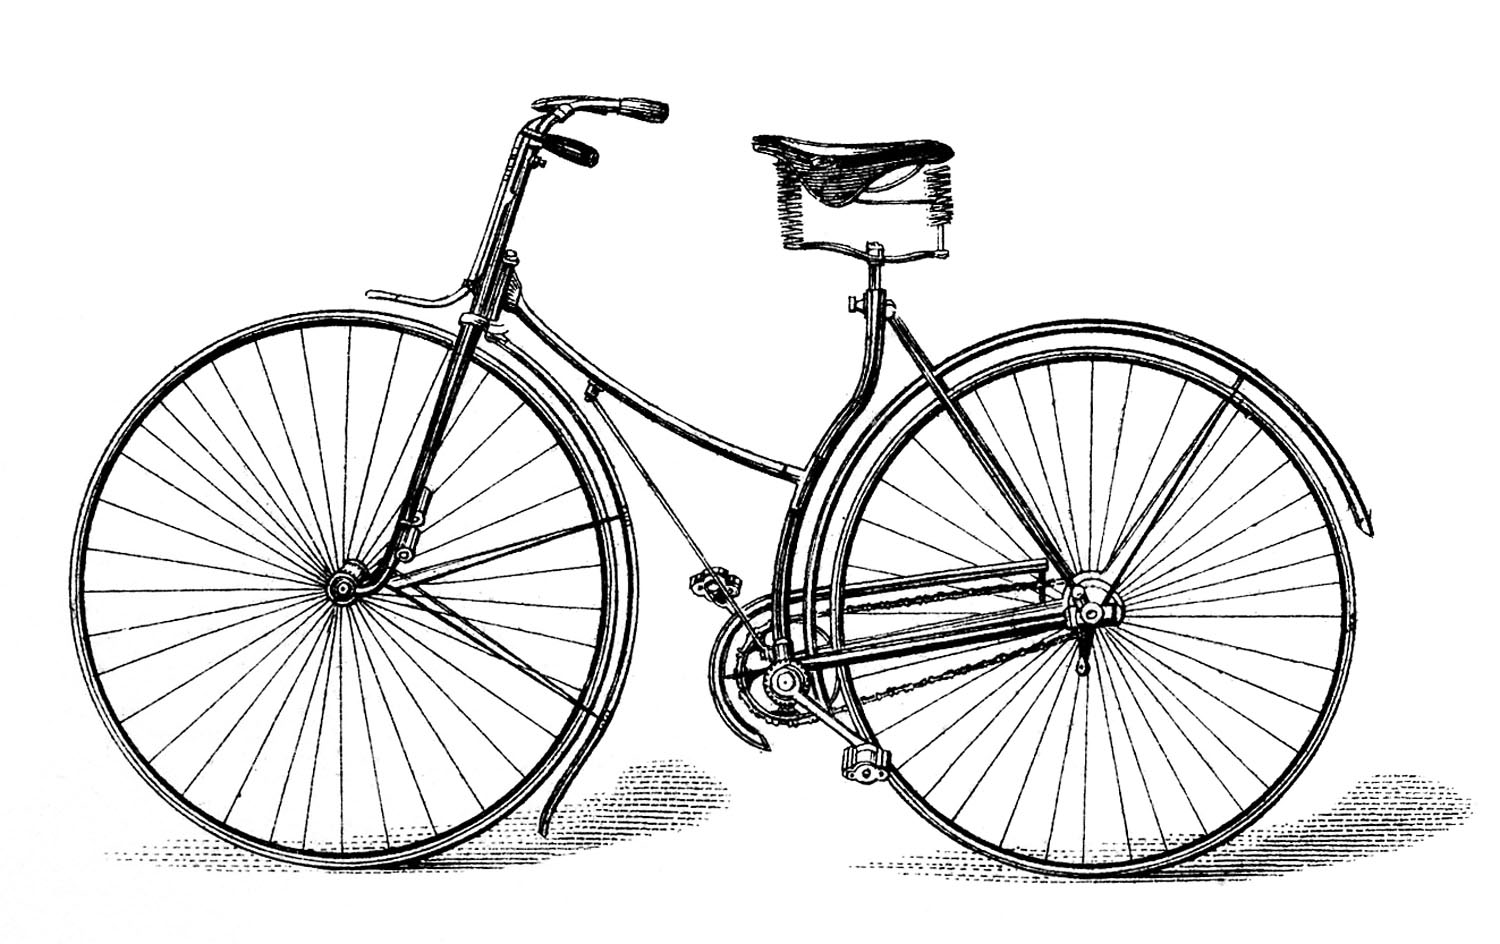 Free Vector Downloads   Vintage Bicycle   The Graphics Fairy